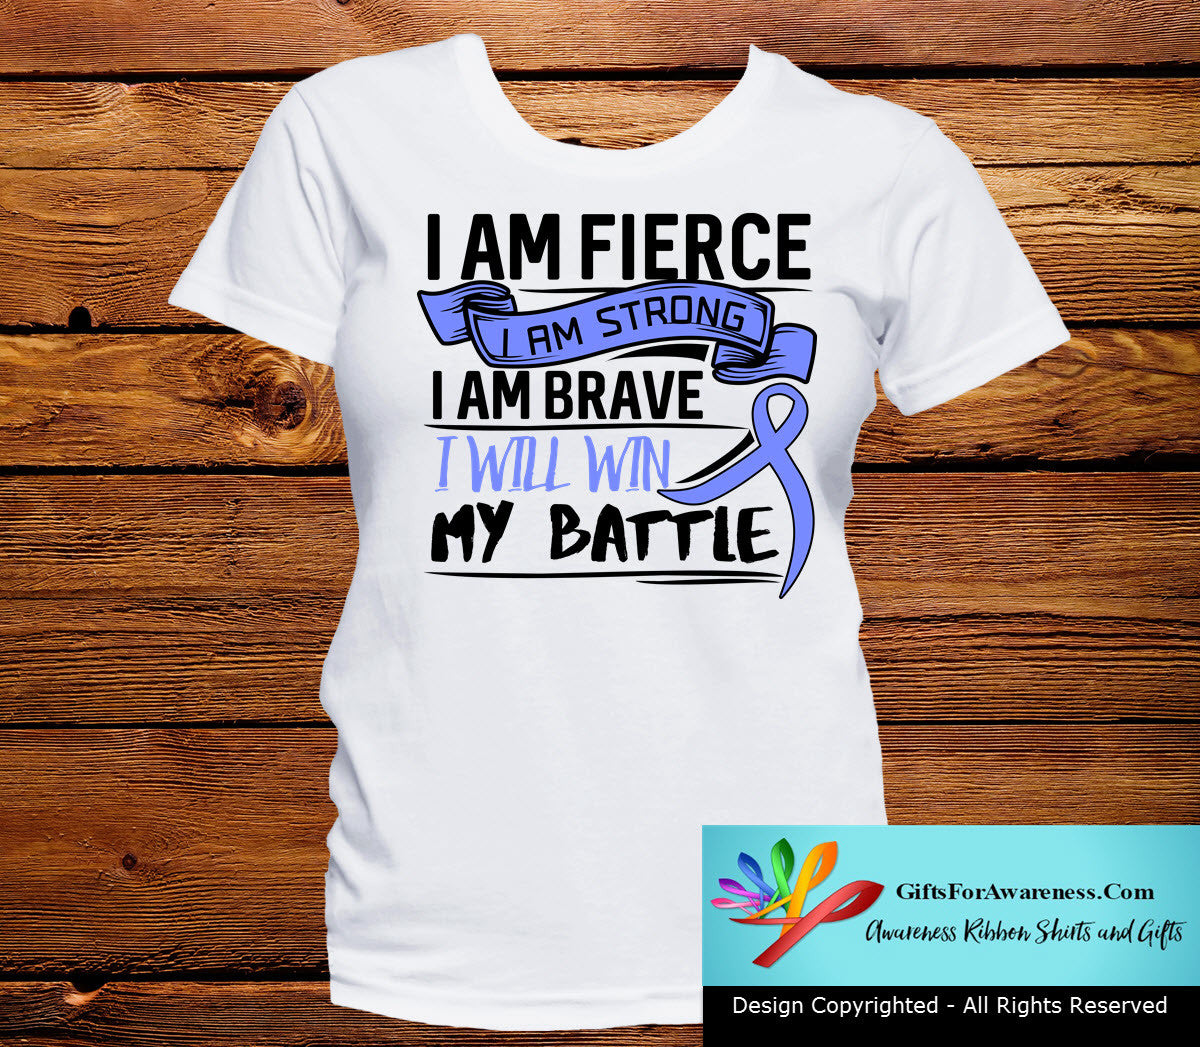 Pulmonary Hypertension I Am Fierce Strong and Brave Shirts - GiftsForAwareness